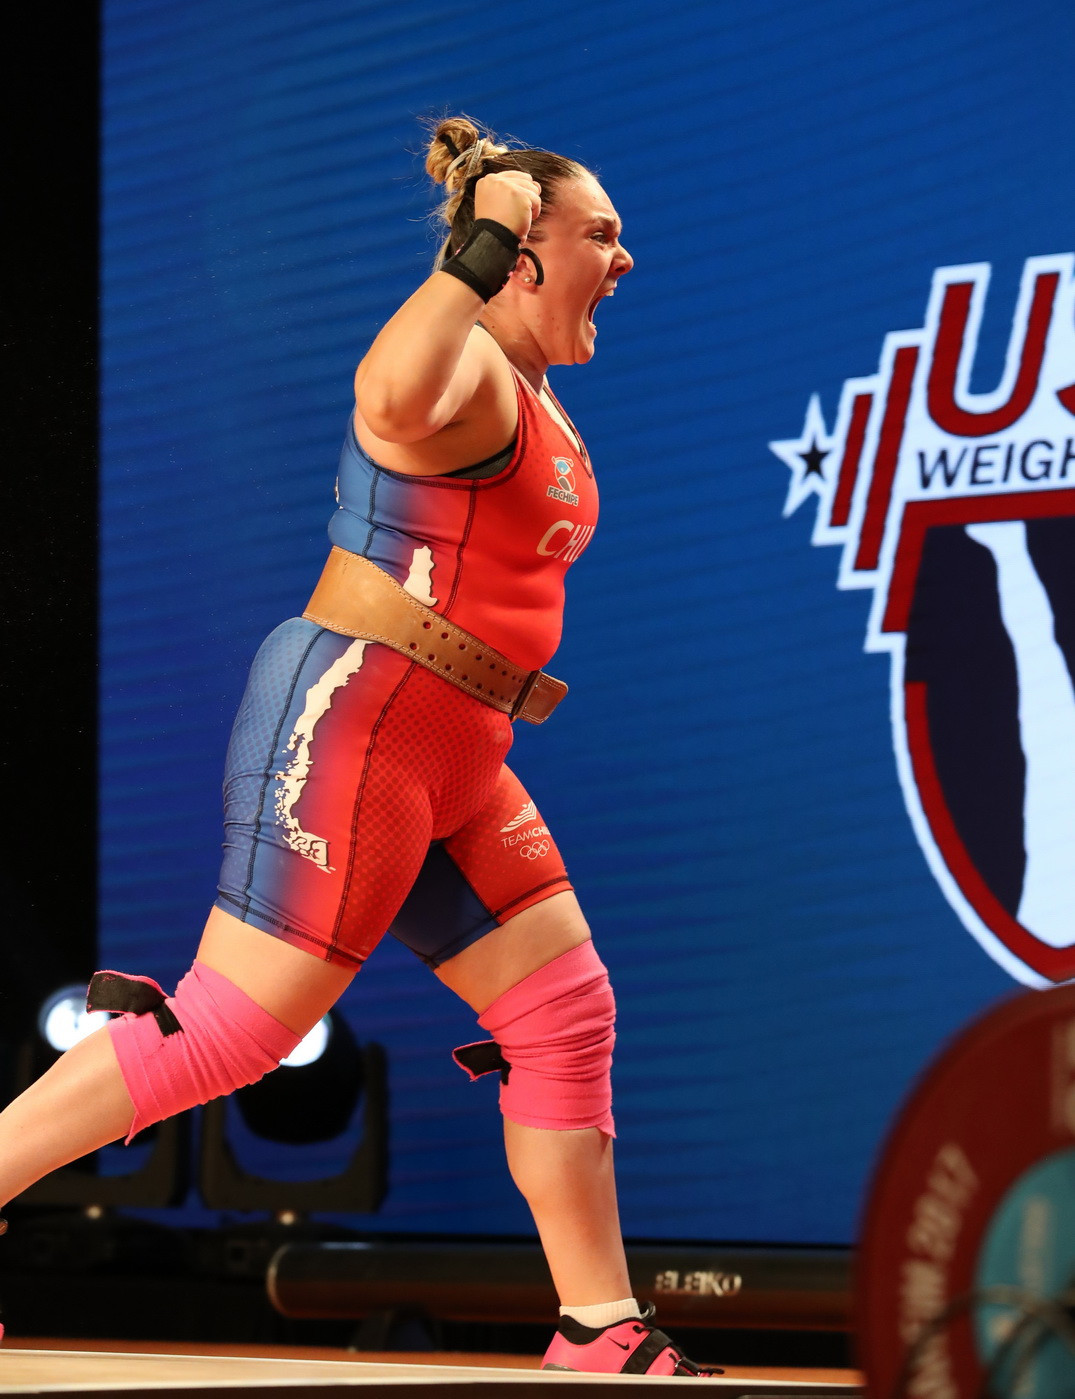 Chile's Maria Fernanda Valdes Paris, the overall runner-up and clean and jerk gold medallist, was very animated in her celebrations ©IWF